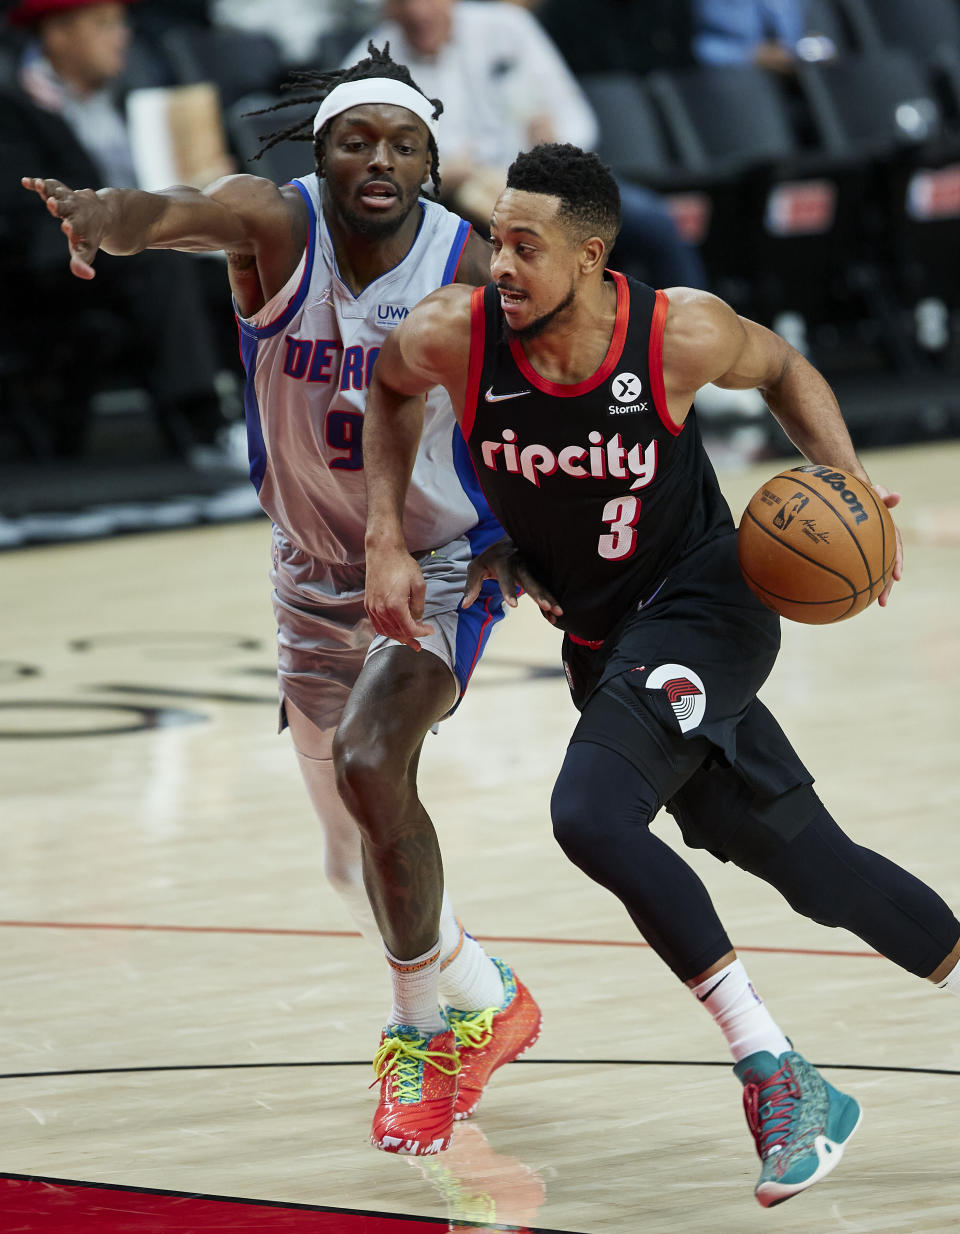 Portland Trail Blazers guard CJ McCollum, right, drives to the basket past Detroit Pistons forward Jerami Grant during the second half of an NBA basketball game in Portland, Ore., Tuesday, Nov. 30, 2021. (AP Photo/Craig Mitchelldyer)